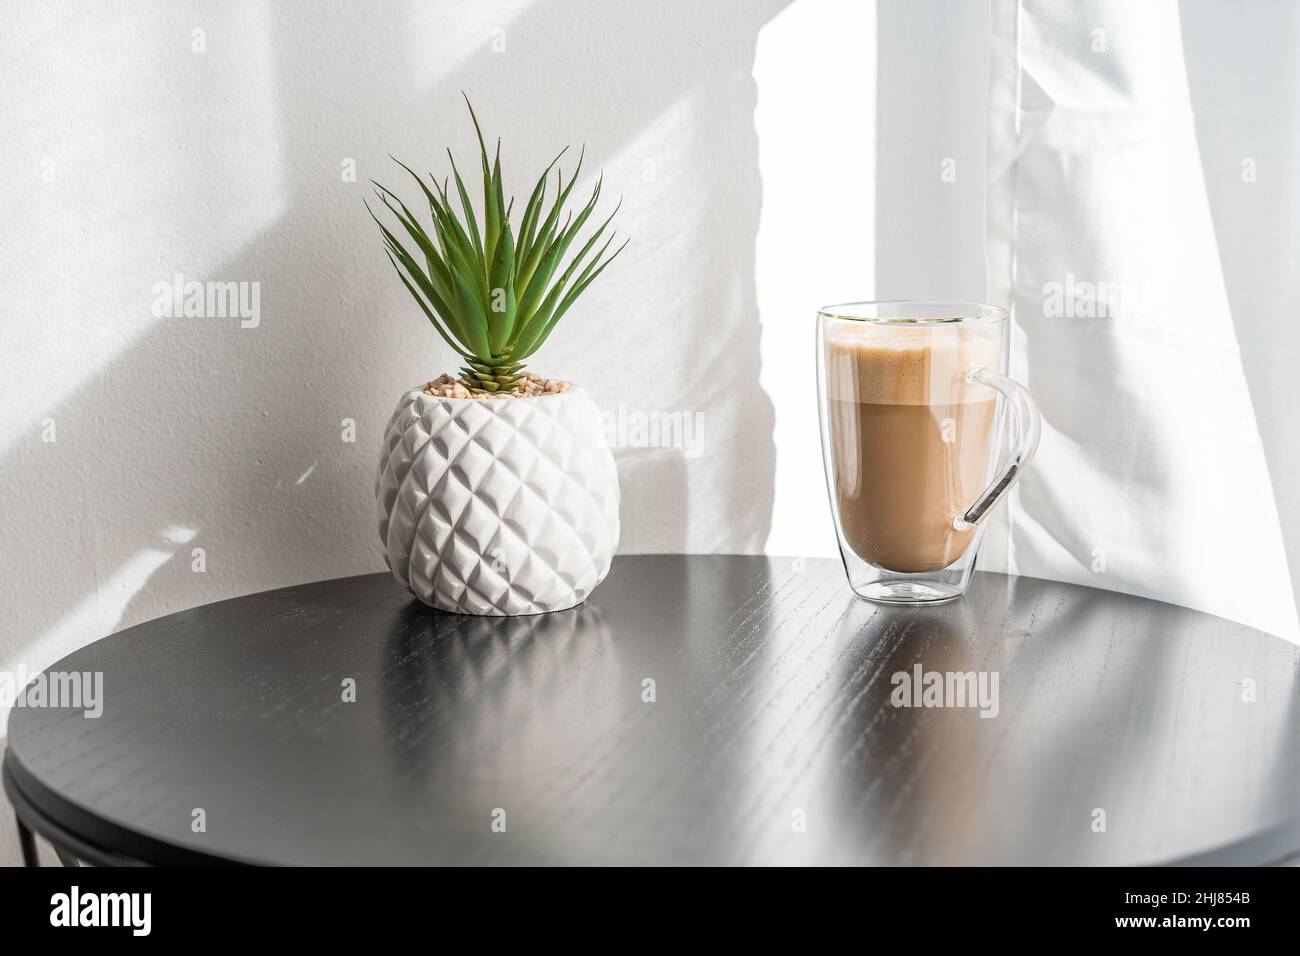 Cup of hot coffee with milk on table. Glass of latte coffee on the table nearly window. Stock Photo